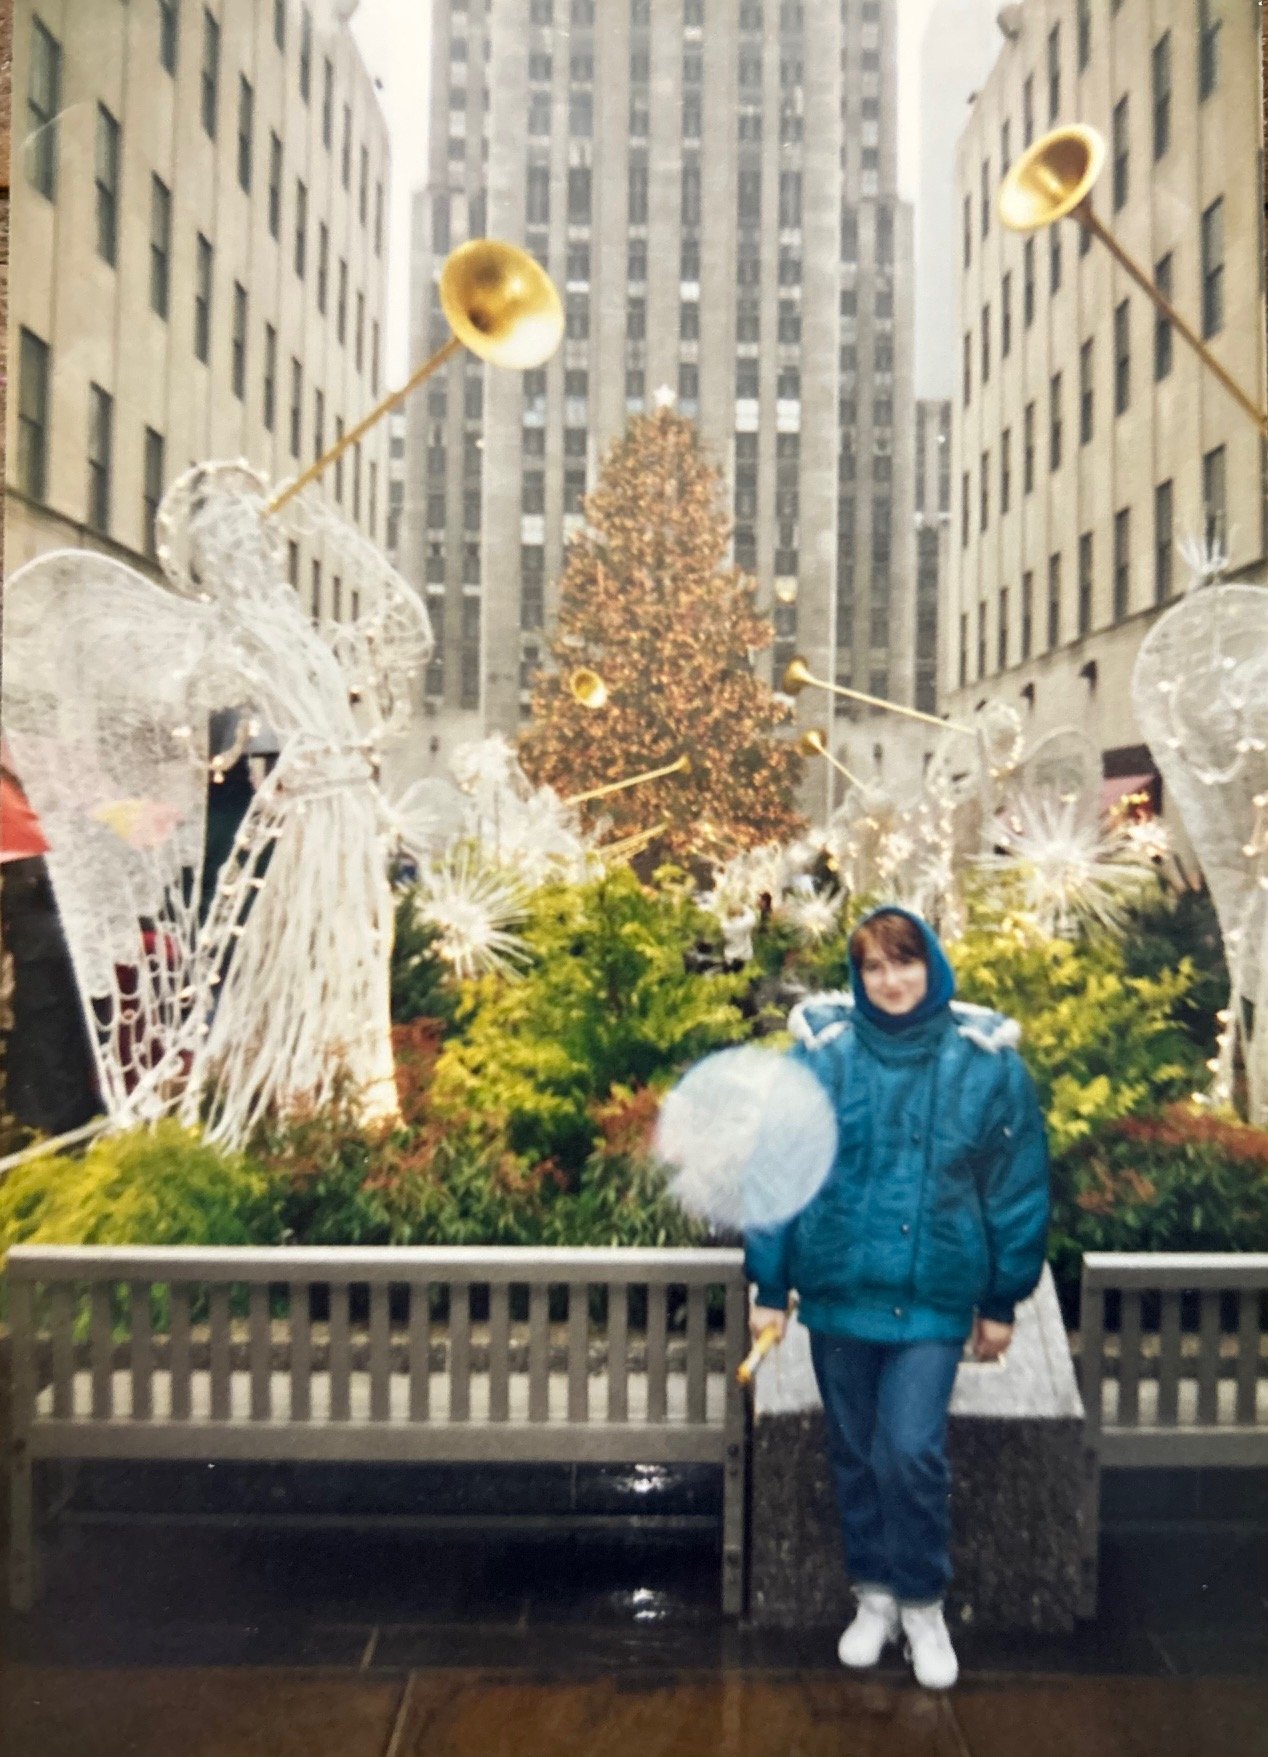    A trip to see the Christmas tree at Rockefeller Center. It took a while to realize that Christmas and New Year’s are not synonymous.   